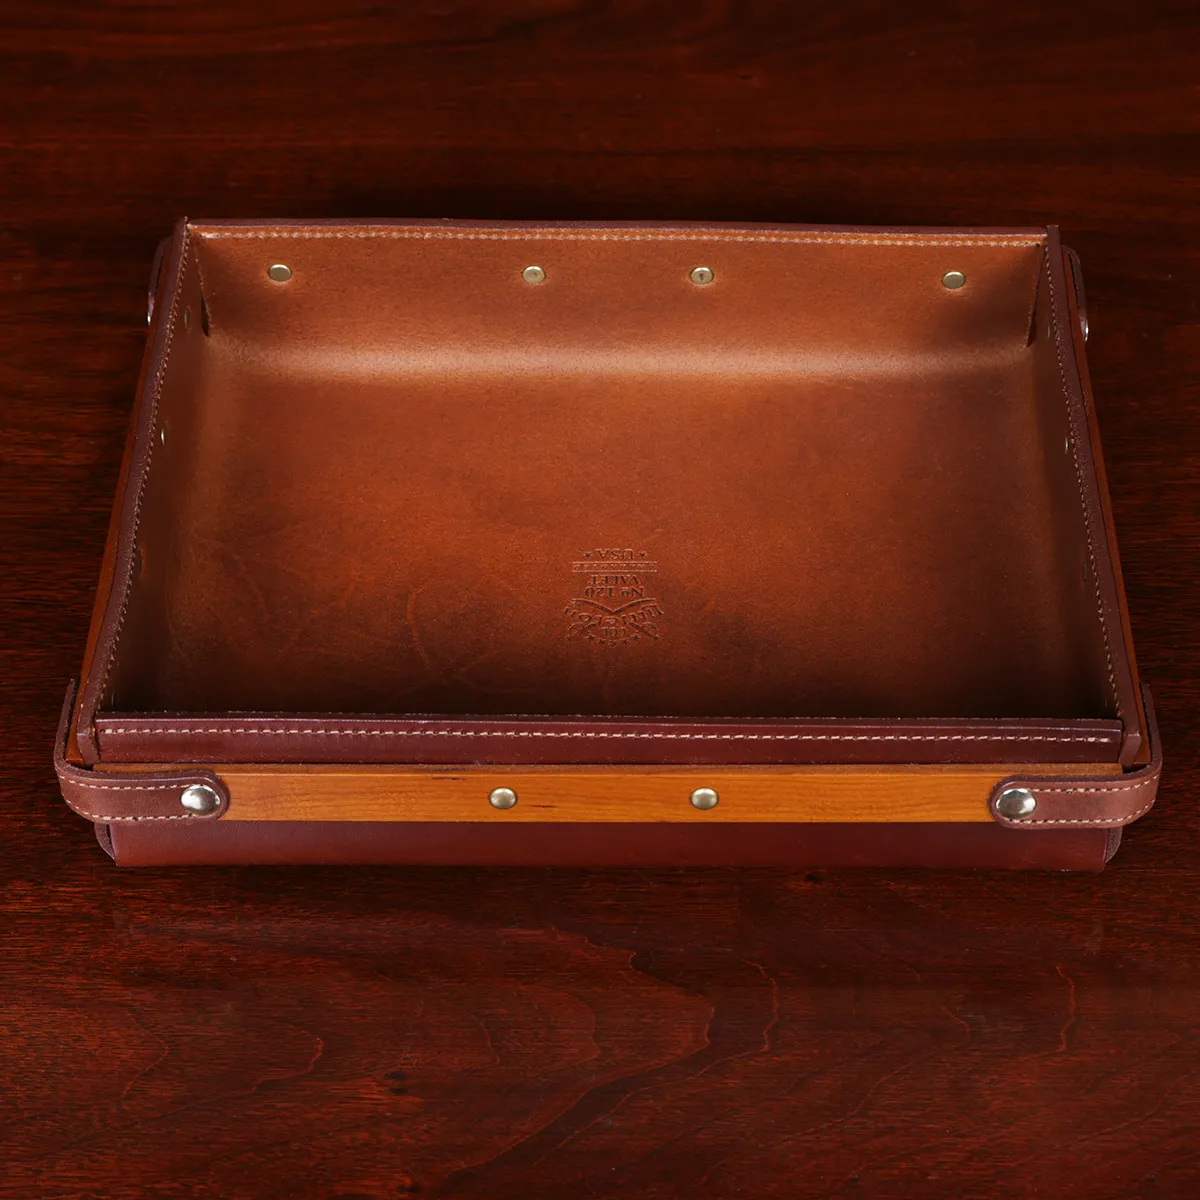 Luxury Leather Catchall Valet Tray for Men